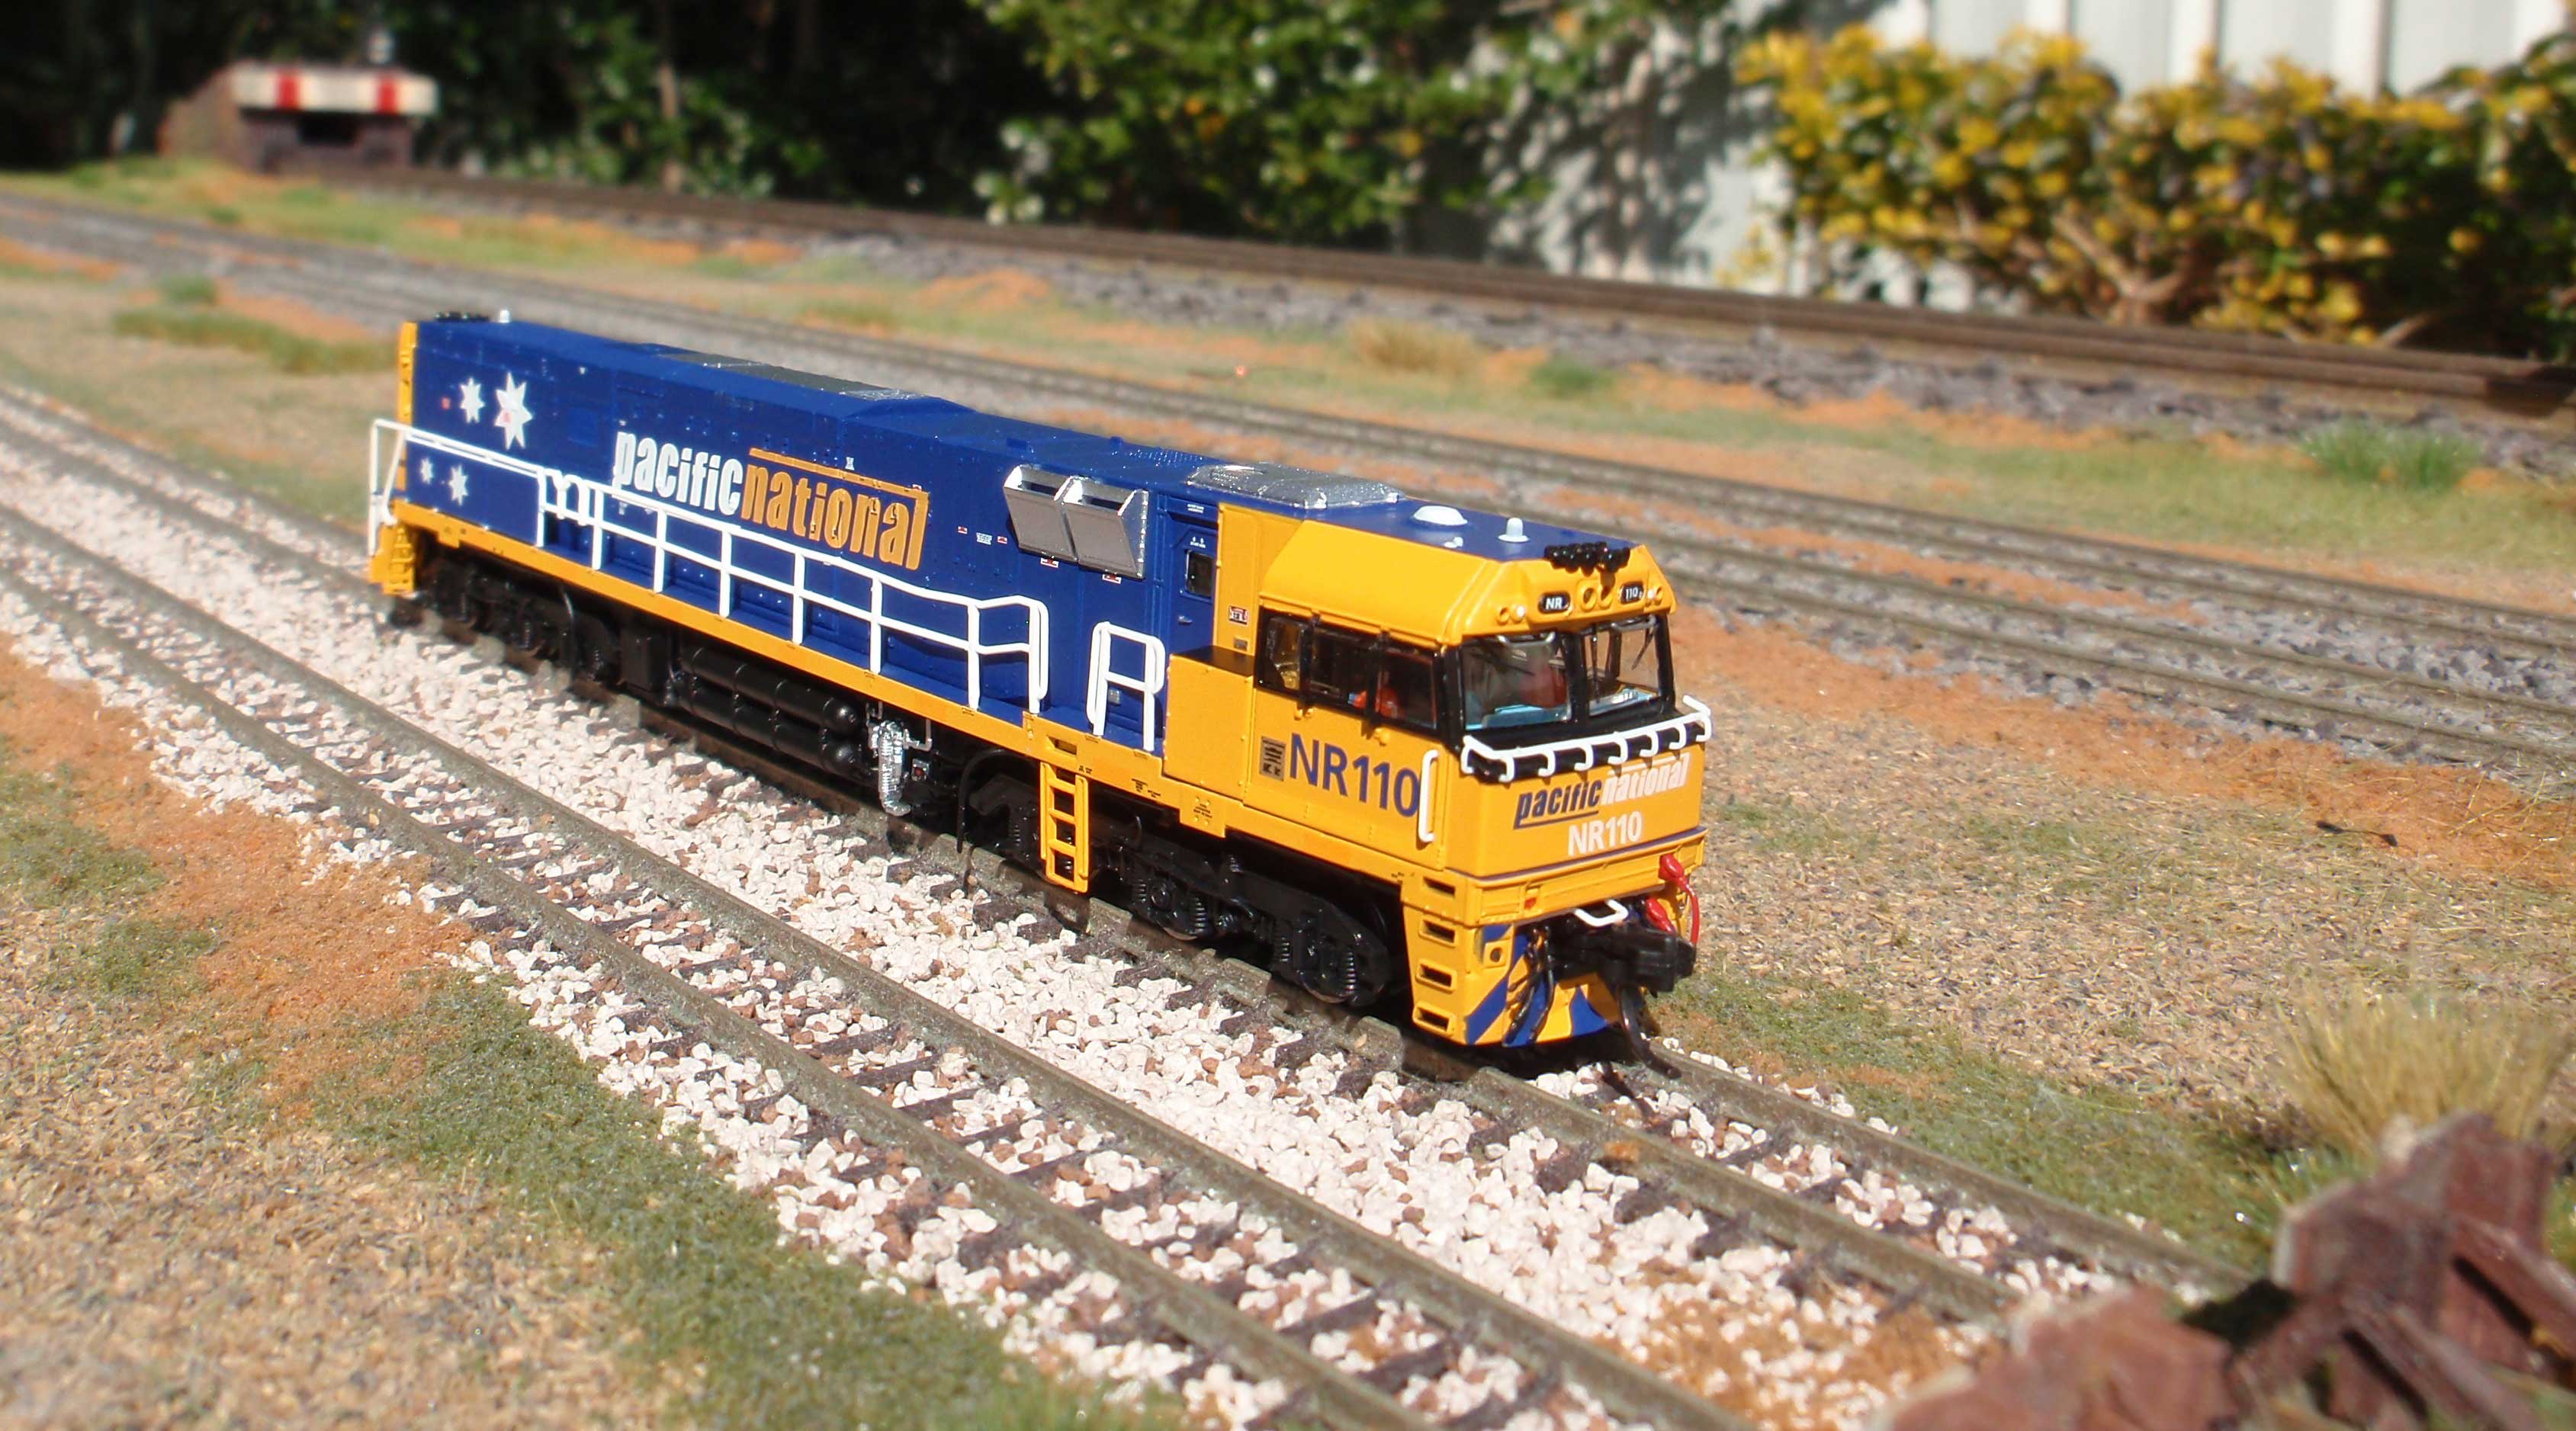 Auscision Models ’N Scale’ NR Class in ‘Pacific National’ livery